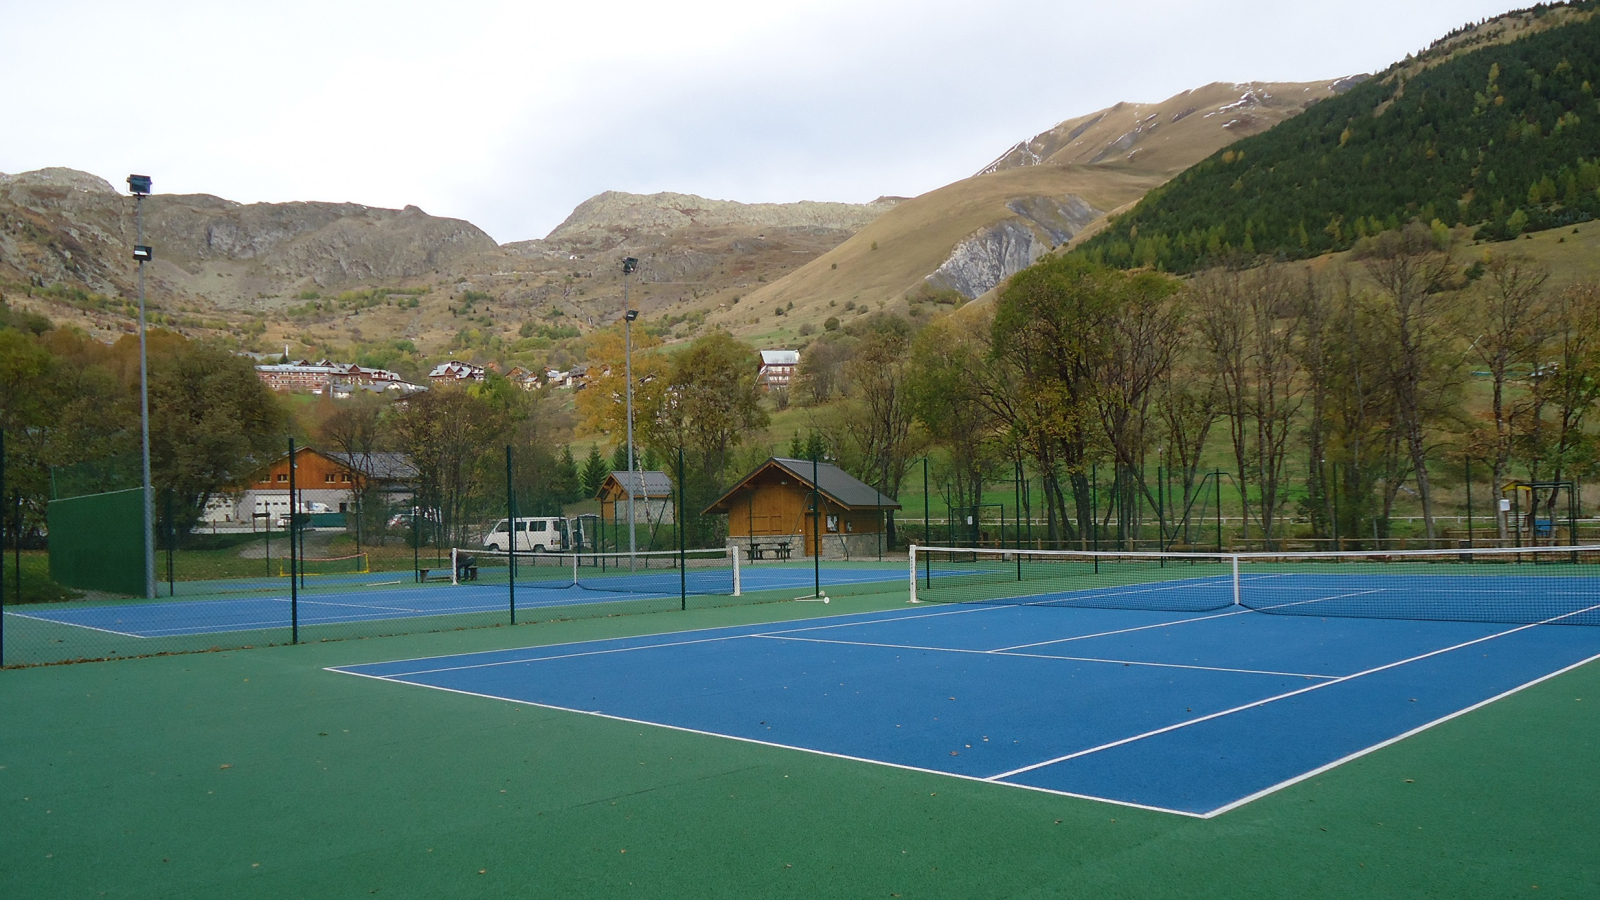 tennis courts at St Sorlin